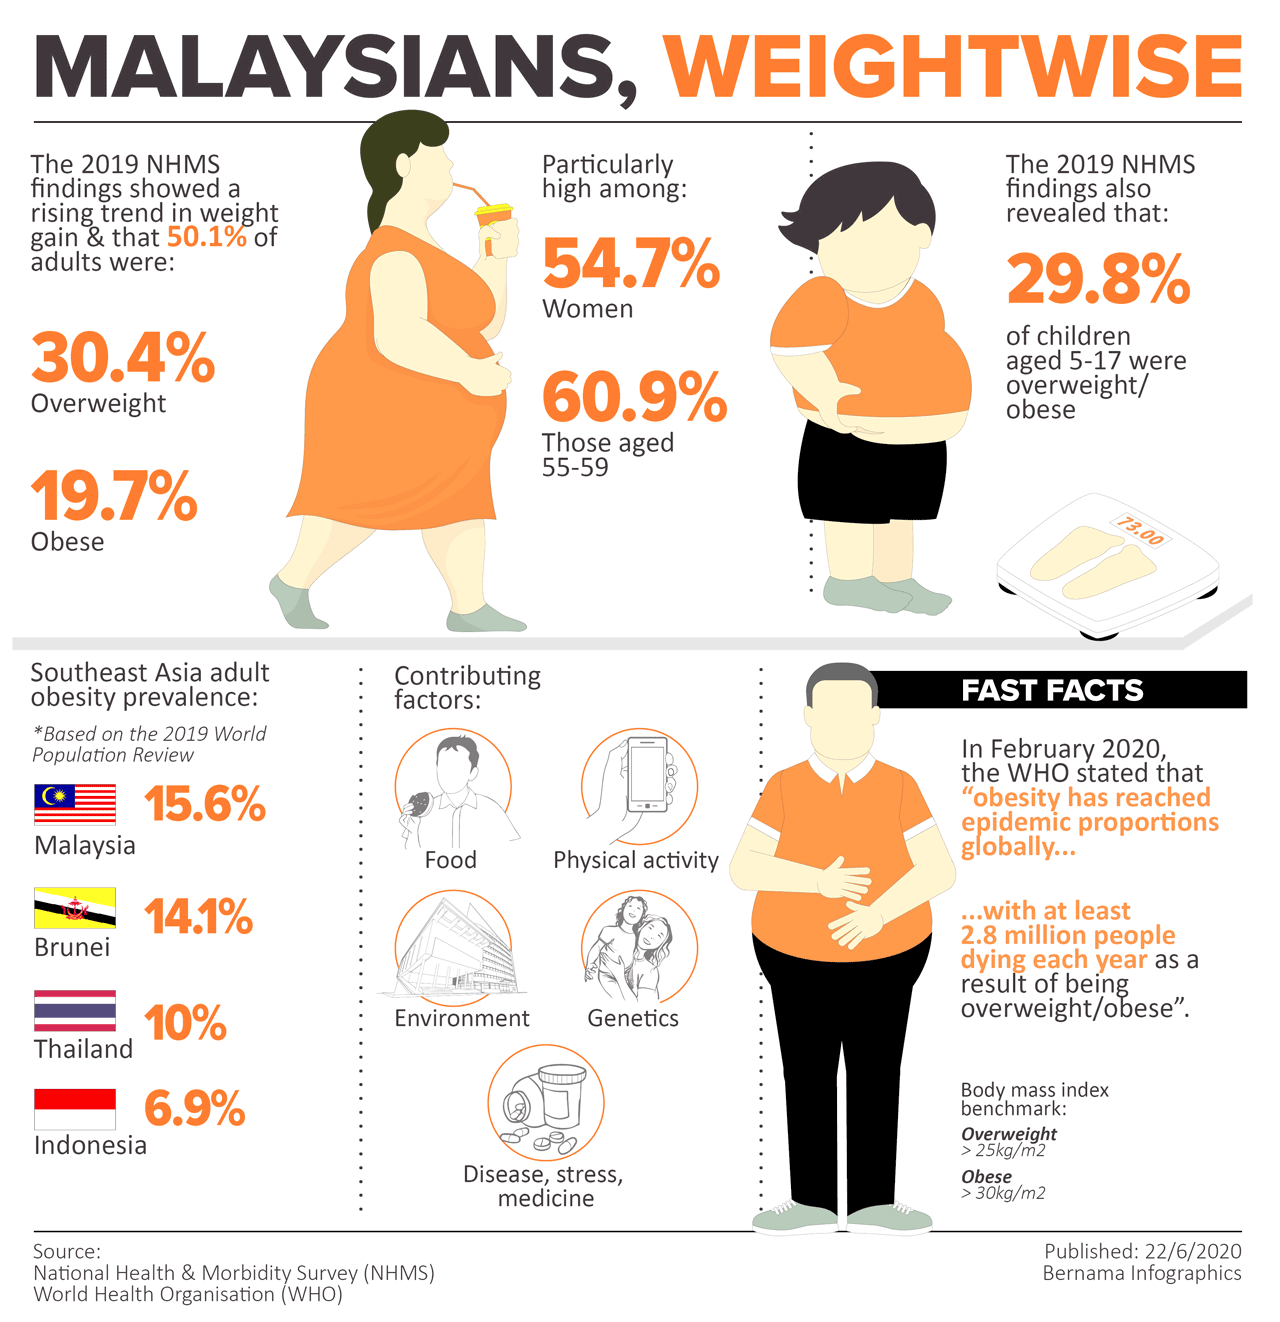 Obesity Overweight Rates Remain High In Malaysia